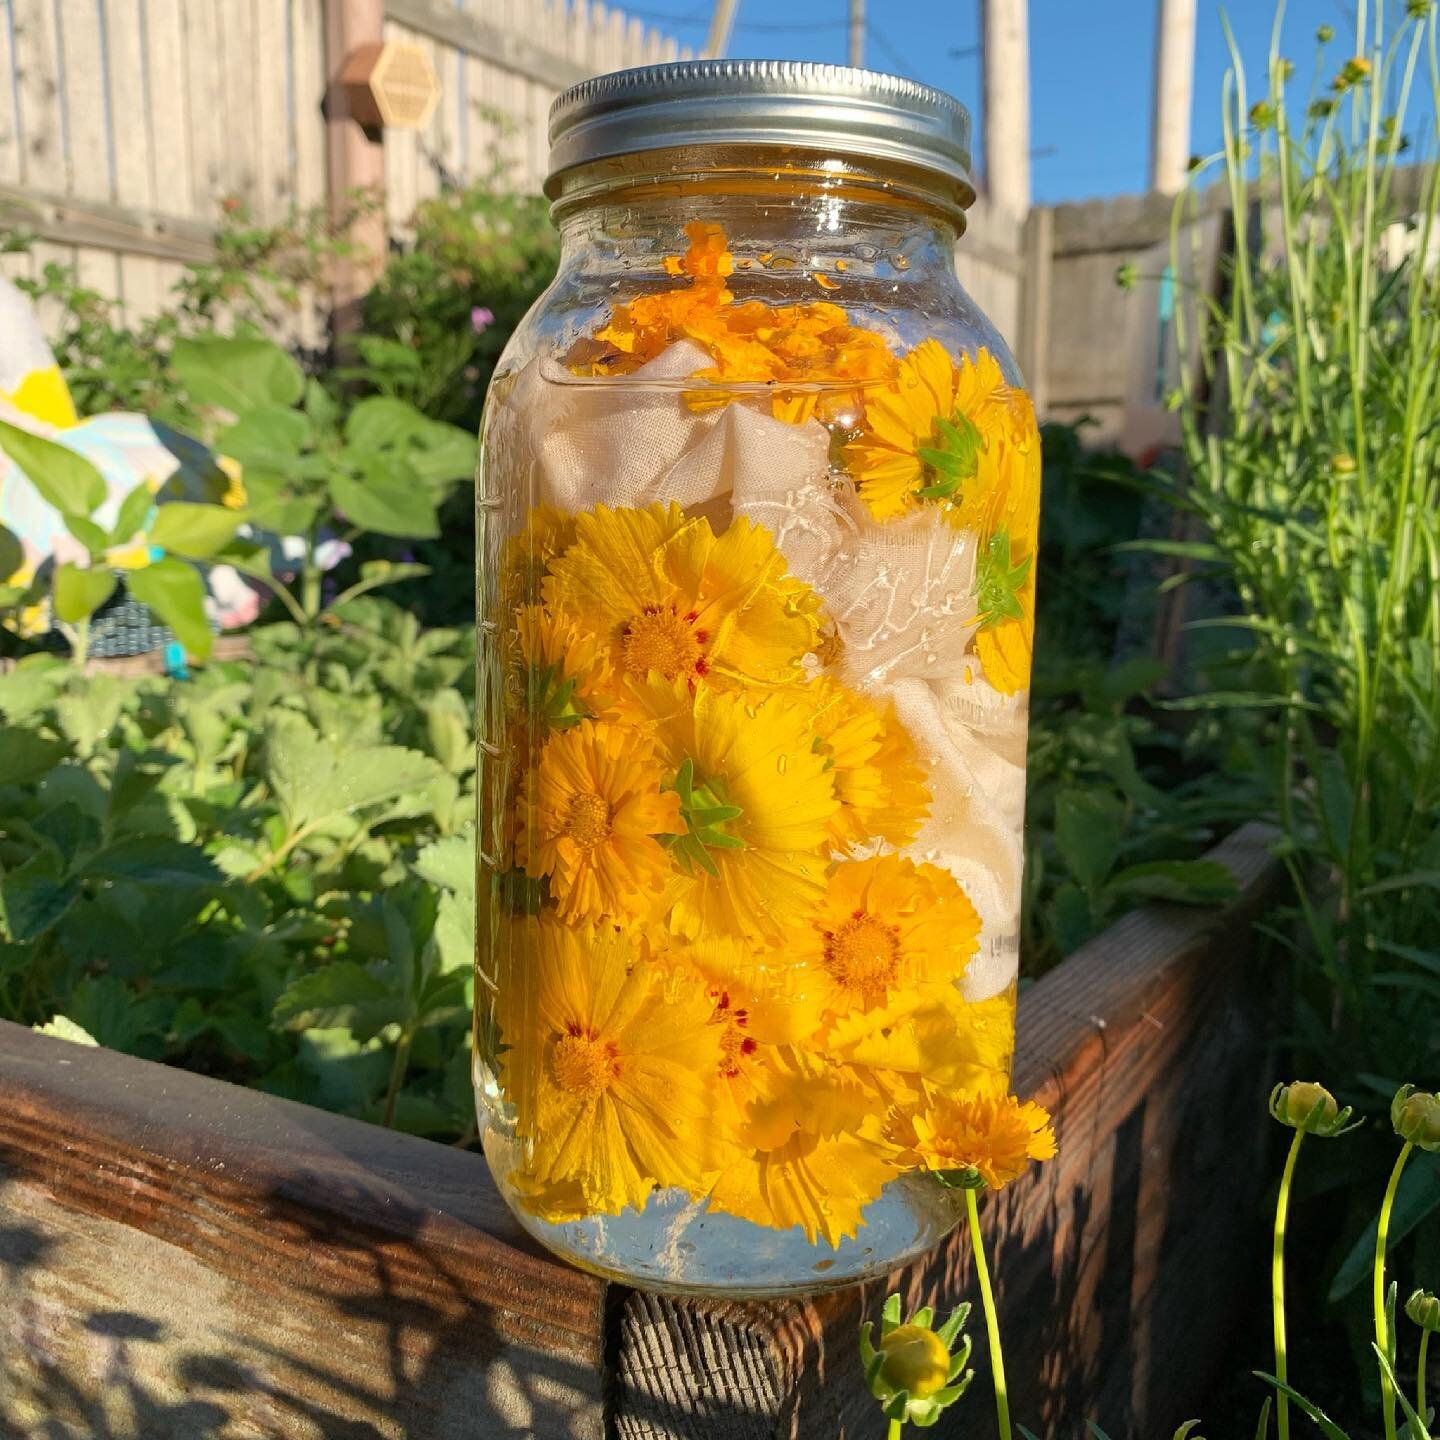 Started a solar dye bath last night with the babe to honor the upcoming summer solstice. ☀️ We harvested all the dye flowers that were in bloom and put them in the jar. 🌼 Fabric was put in and all was covered with water. Then a big load of sandbox s